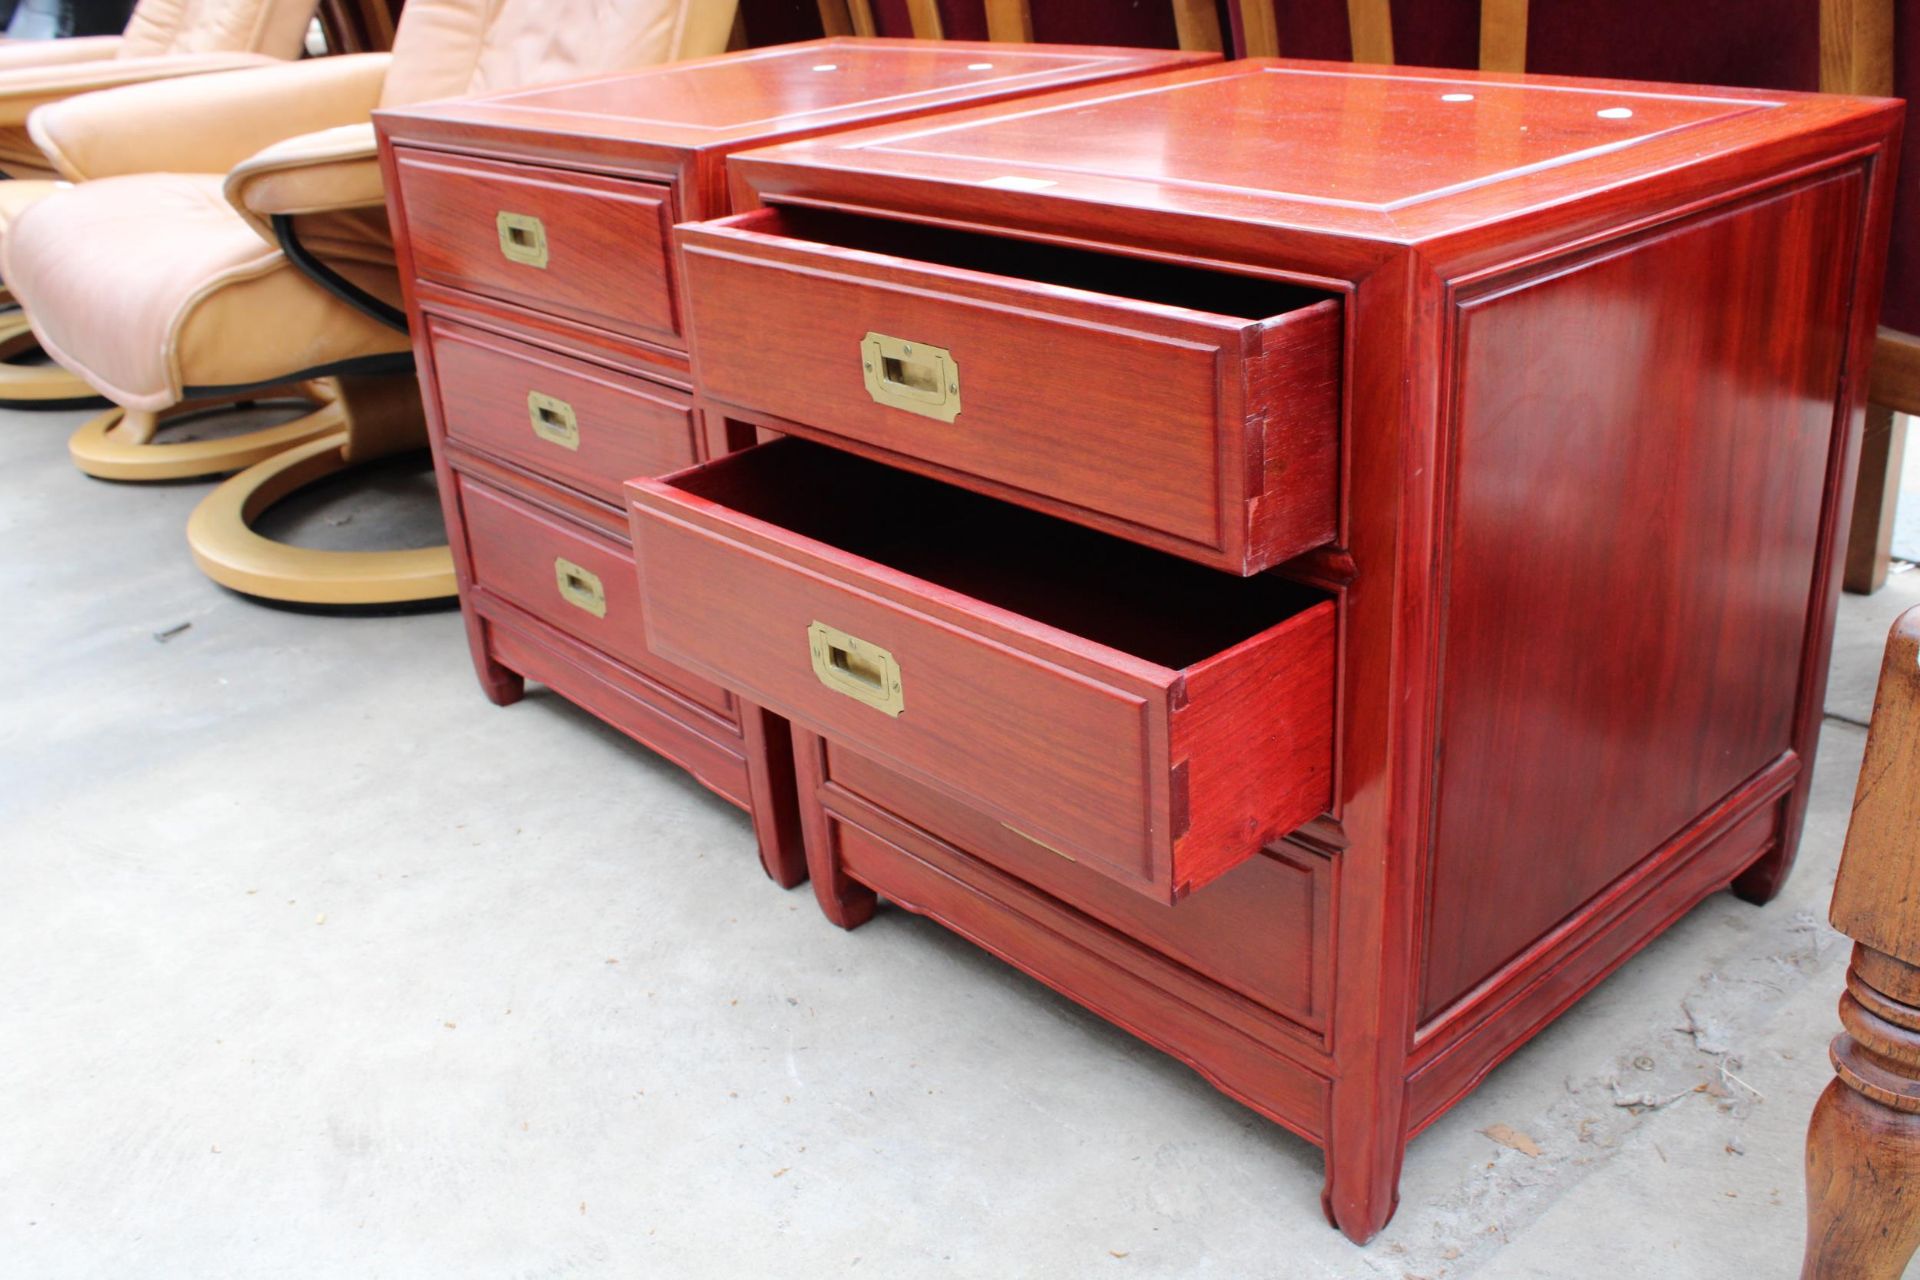 A PAIR OF MODERN HARDWOOD BEDSIDE CHESTS WITH THREE DRAWERS AND BRASS CAMPAIGN STYLE HANDLES - Image 2 of 3